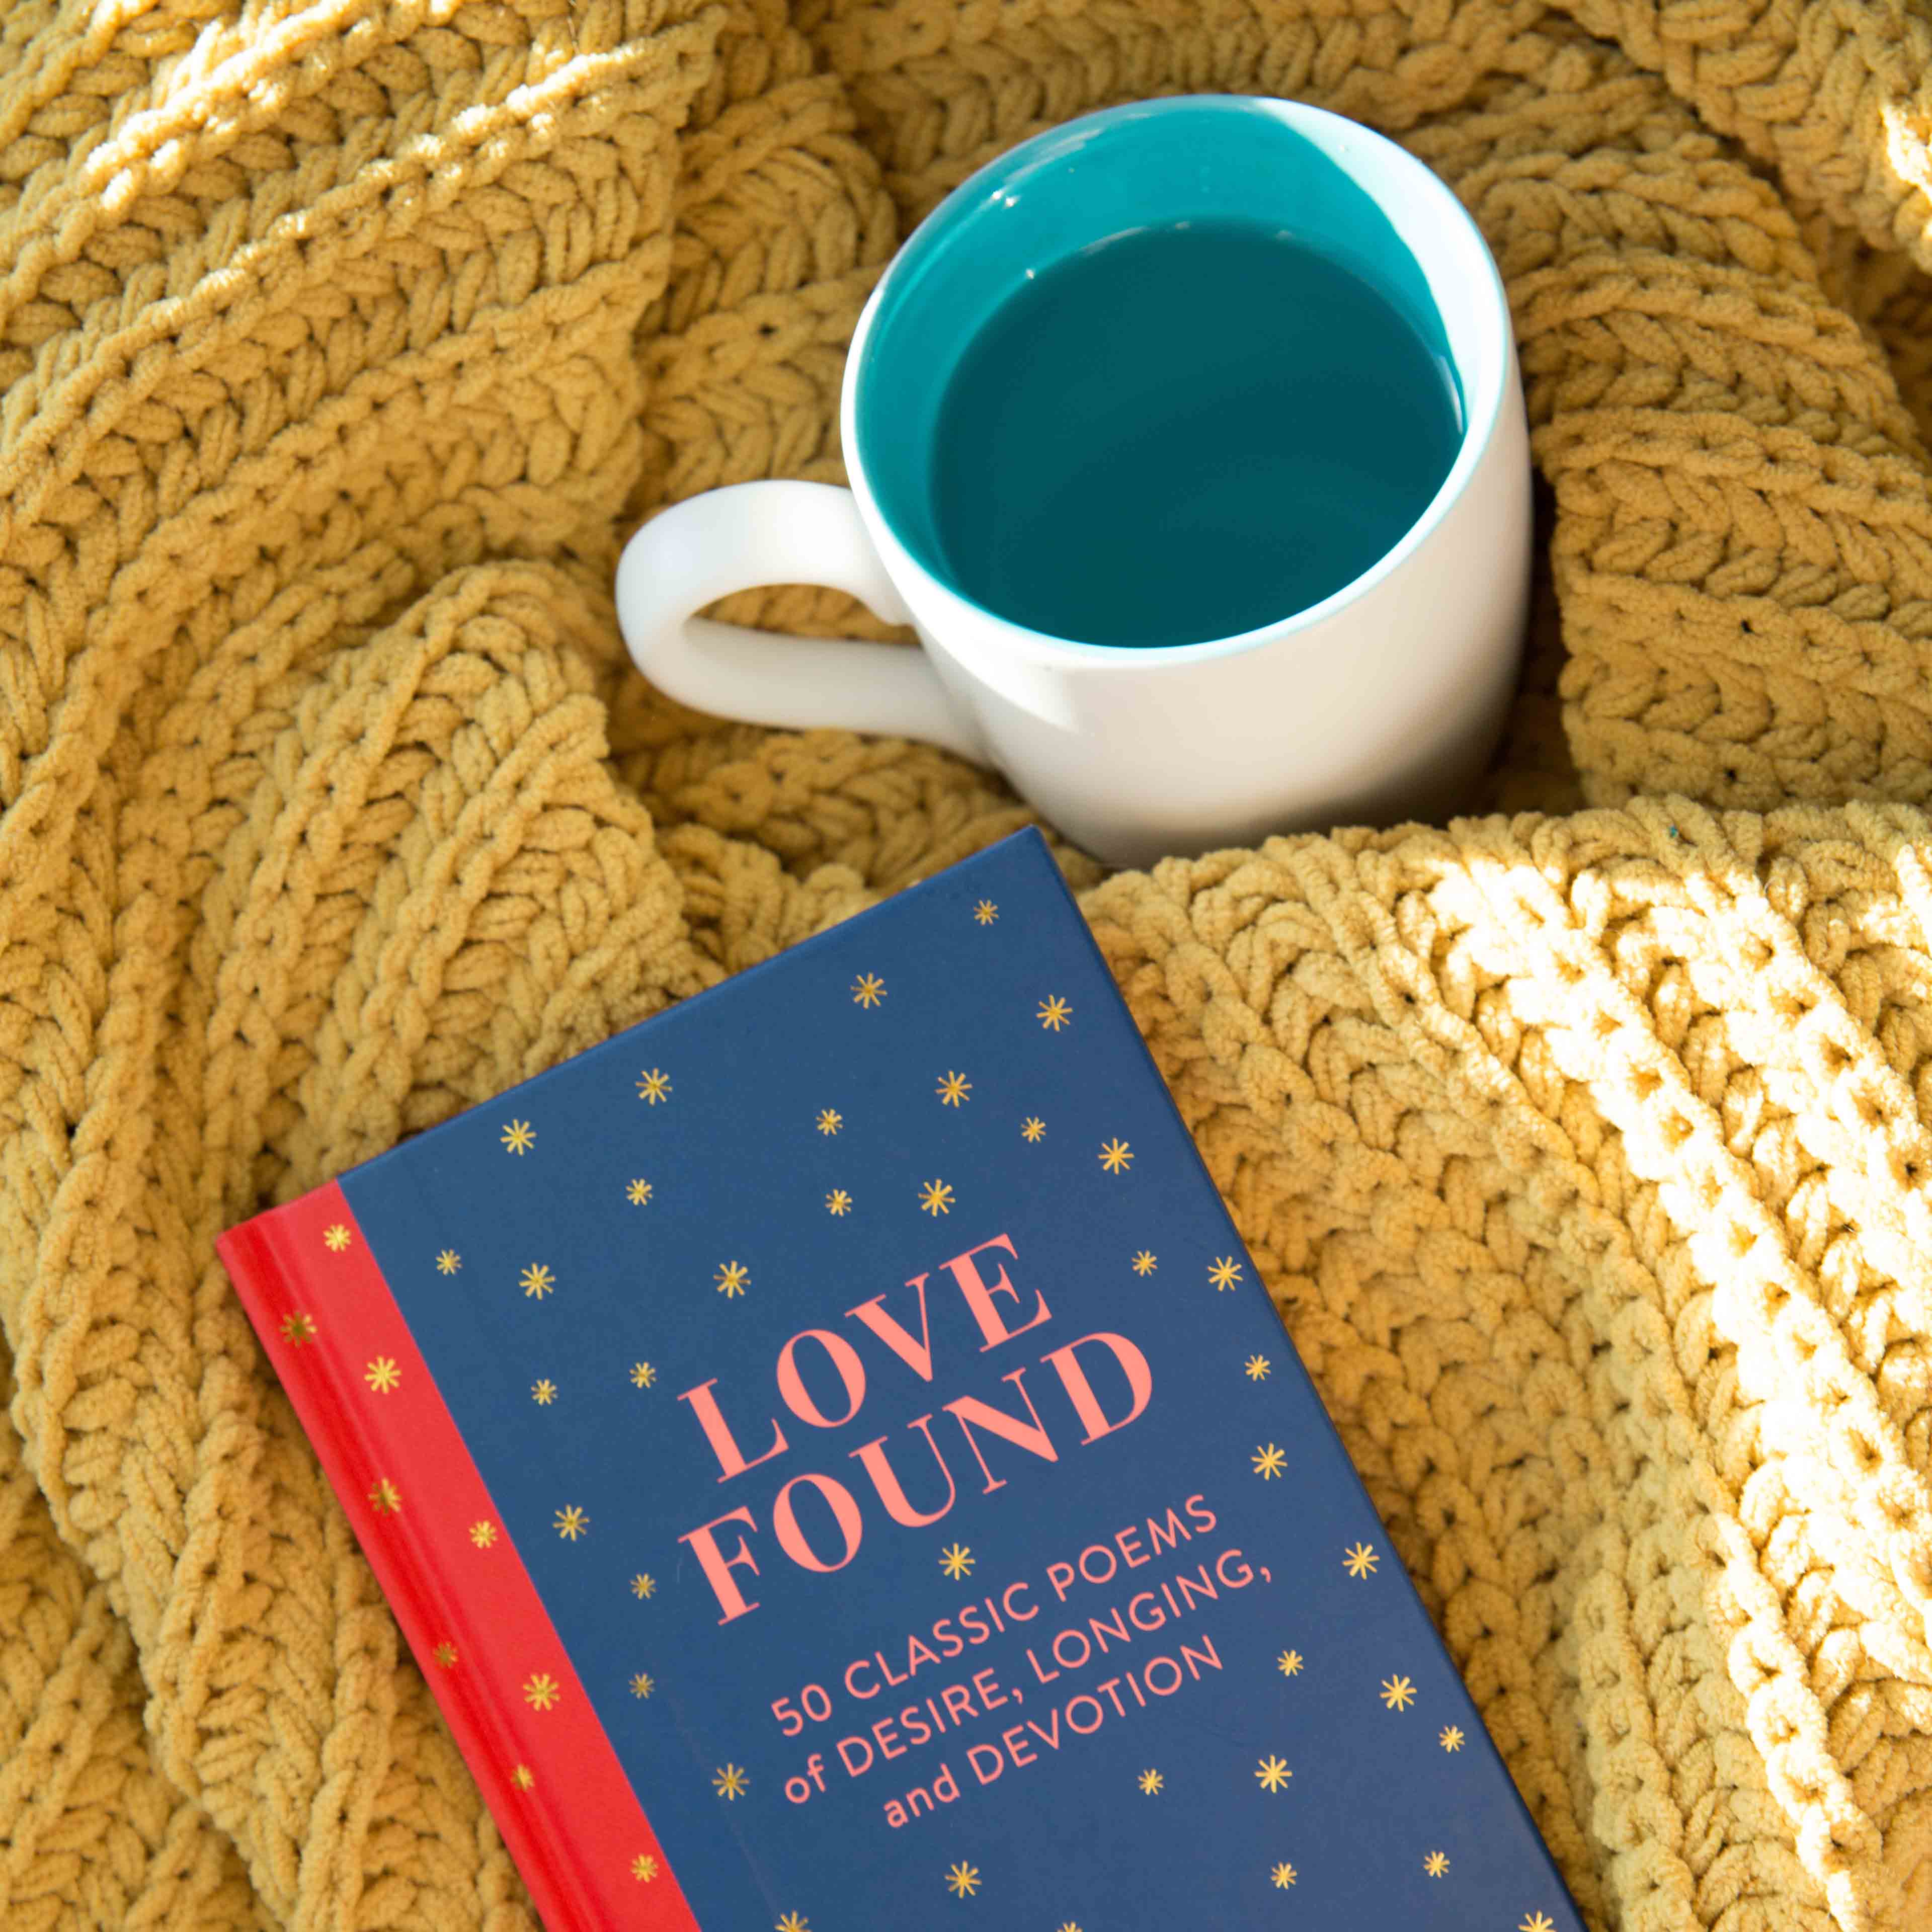 Read the Love Found poetry book review to get a sense for the style of poems inside.